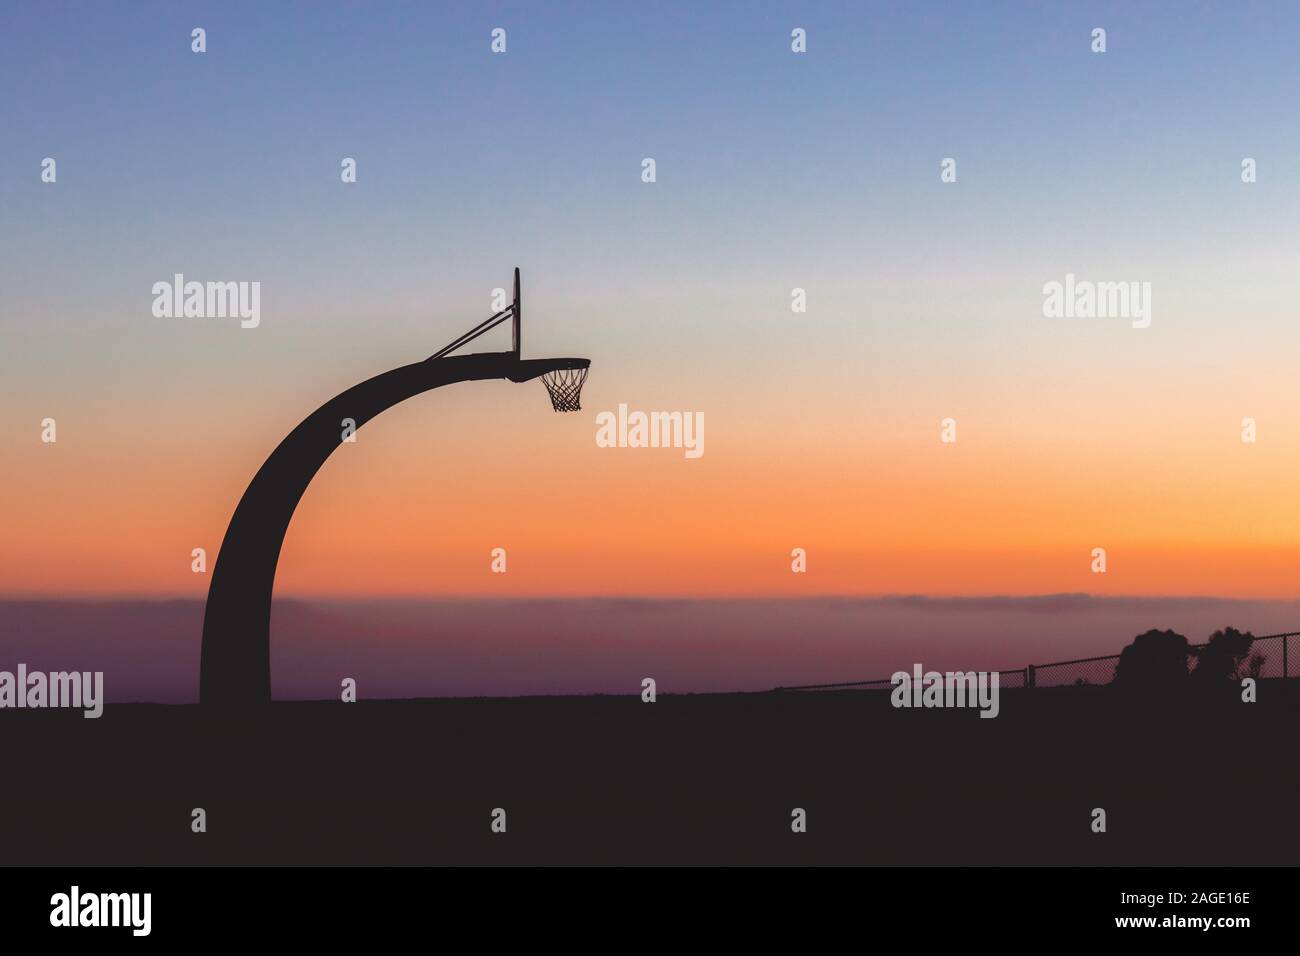 Silhouette of a basketball hoop with the beautiful view of sunset in the background Stock Photo